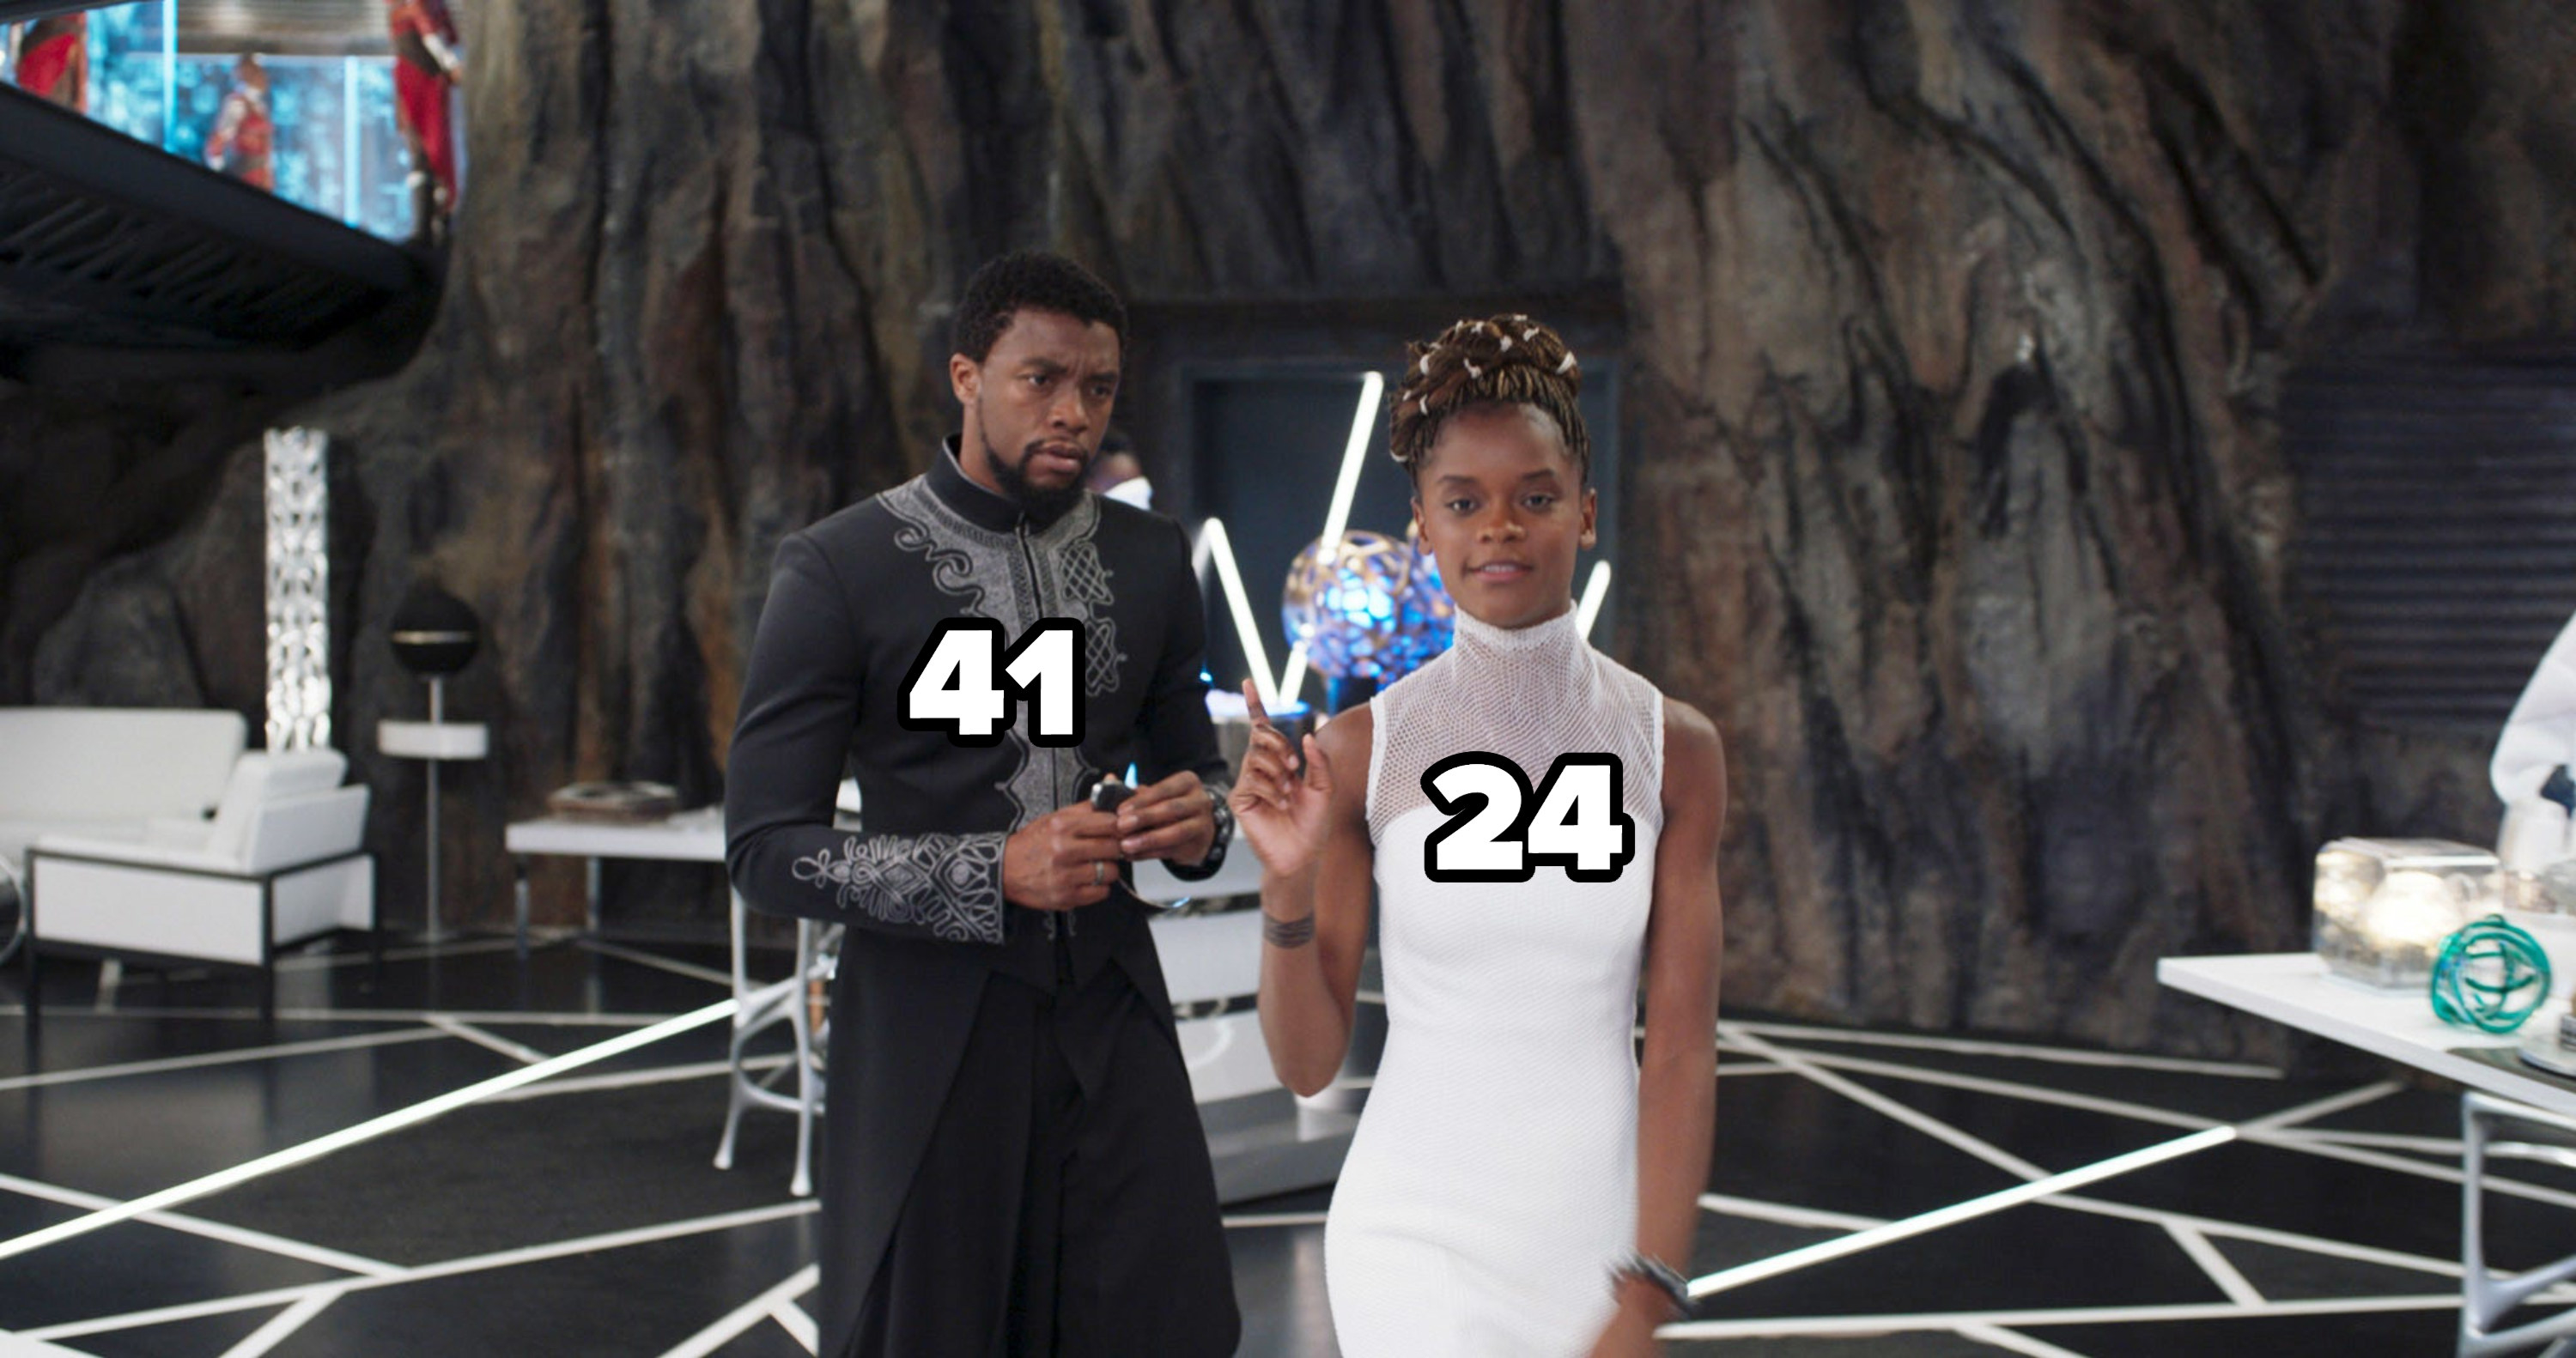 T&#x27;Challa and Shuri in her lab, with T&#x27;Challa labeled 41 and Shuri la beled 24